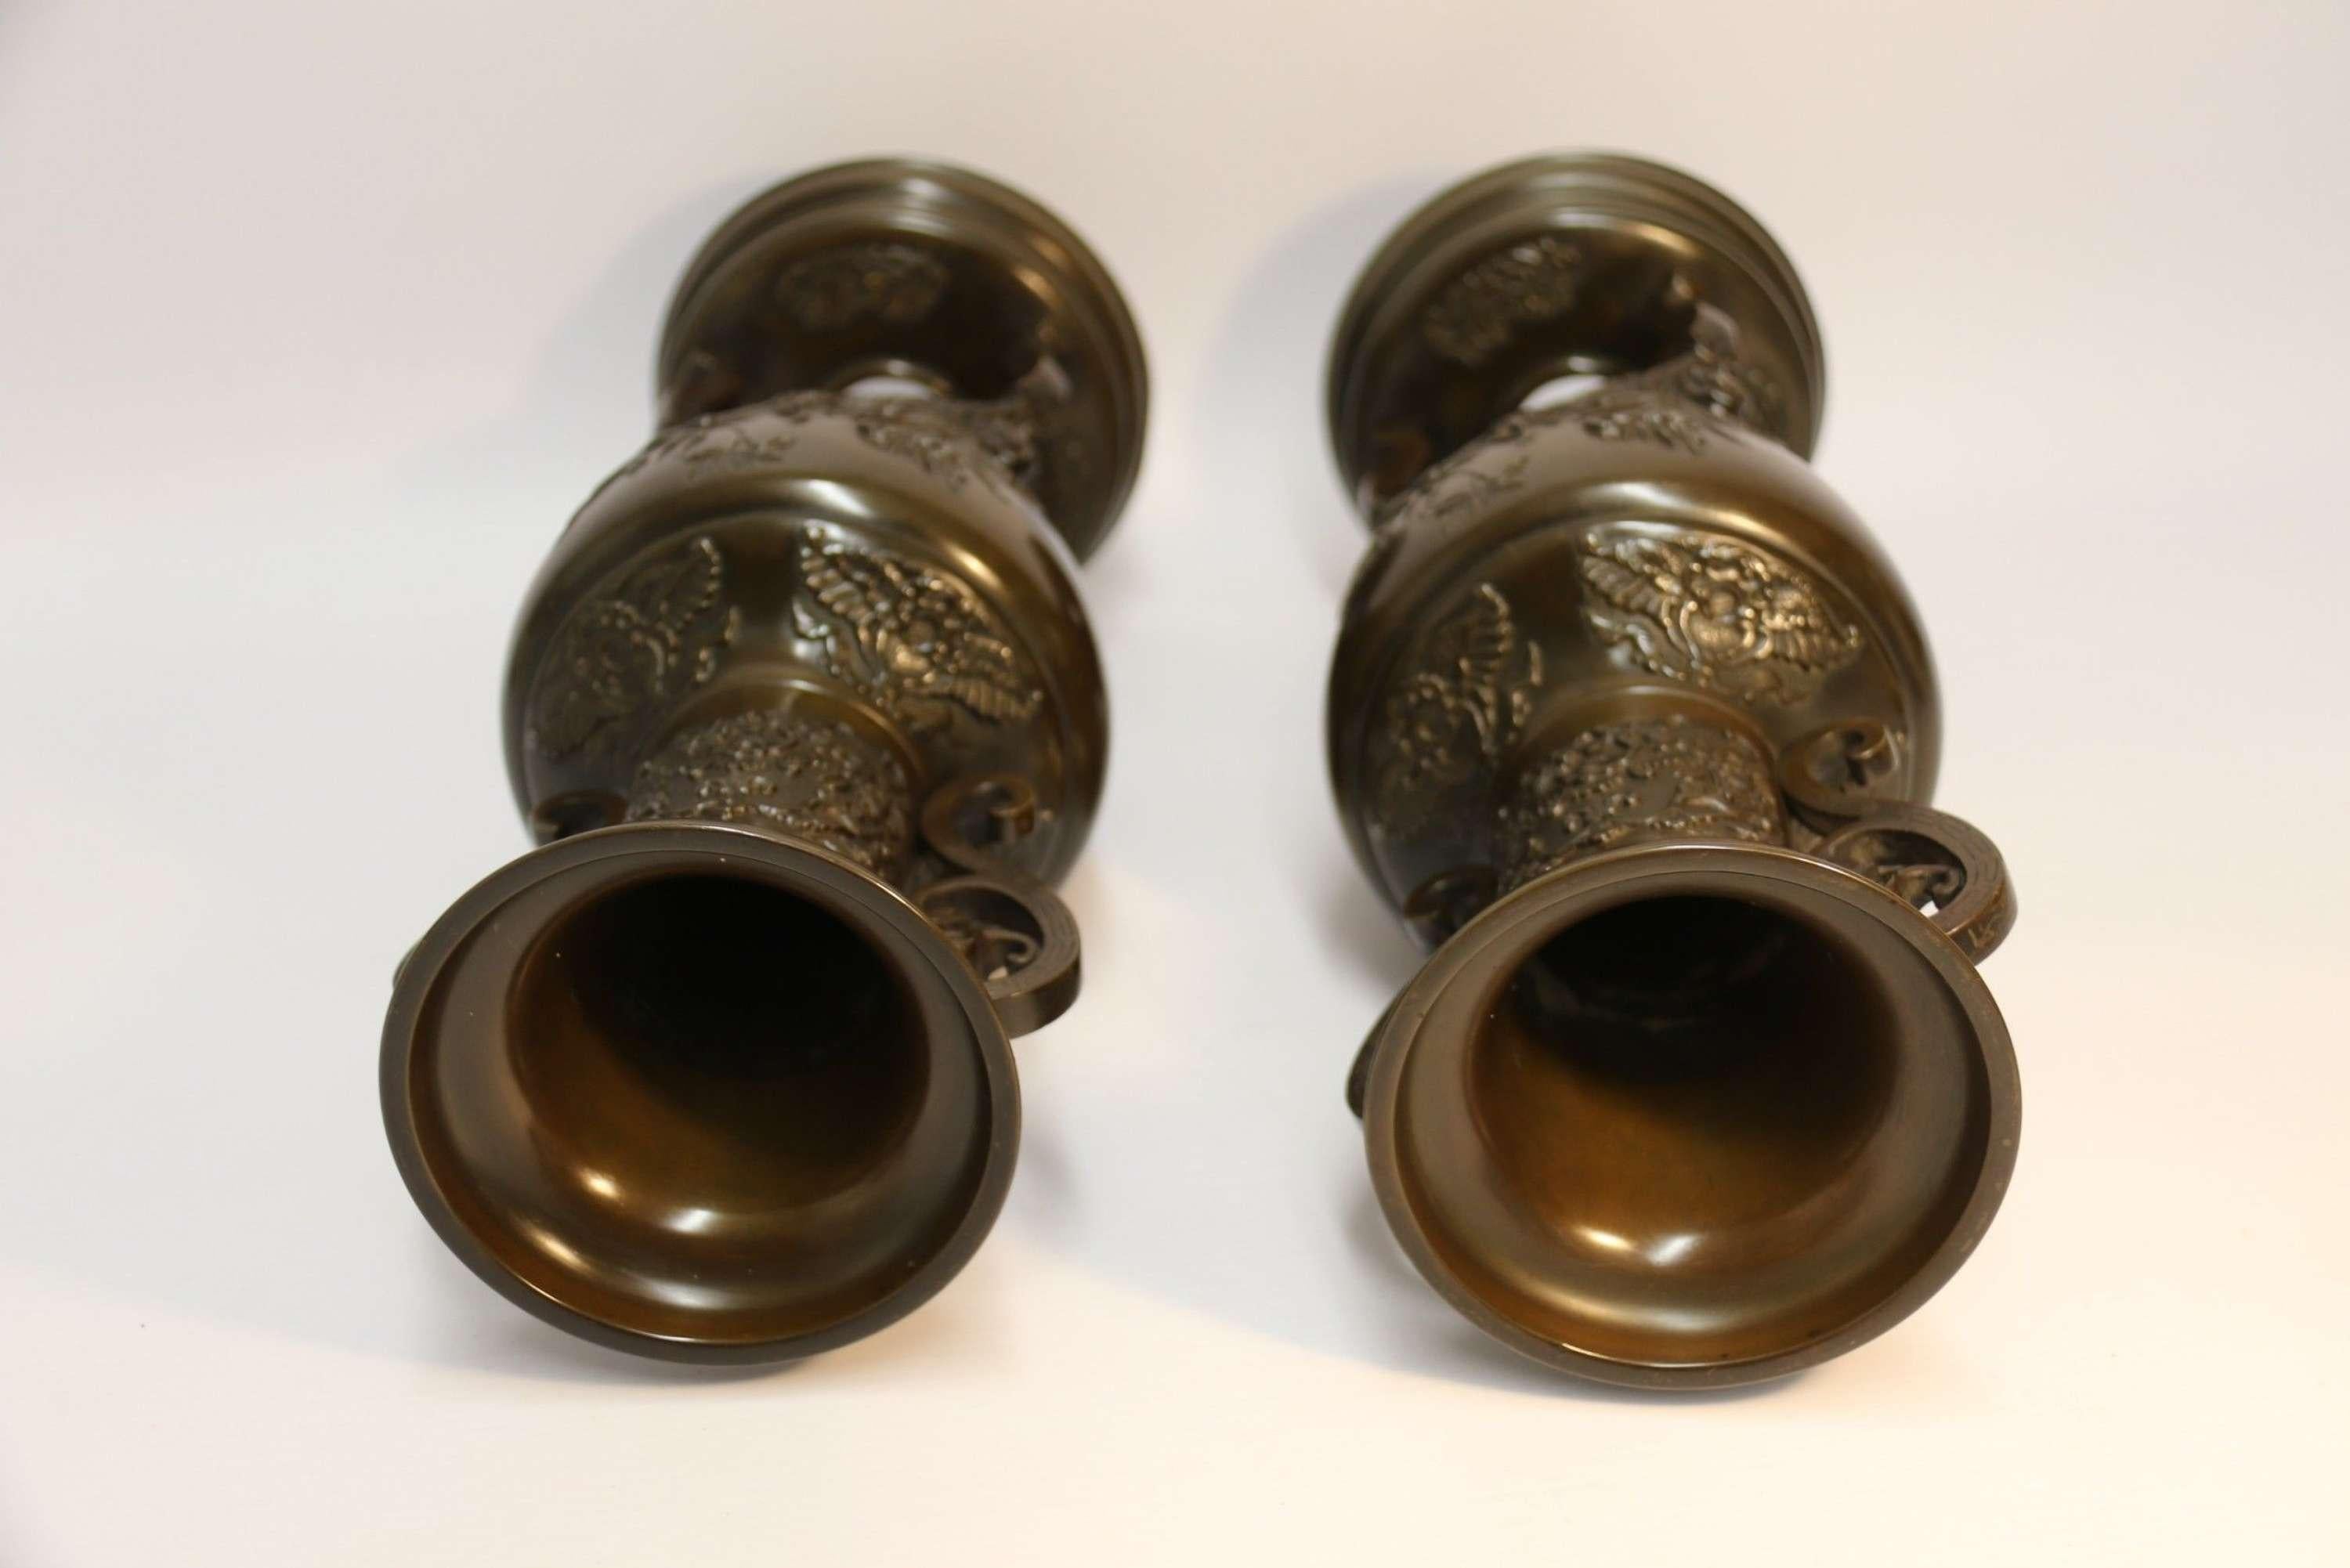 Pair of Meiji Period Japanese Bronze Vases with Mask Head Handles, circa 1900 In Good Condition For Sale In Central England, GB